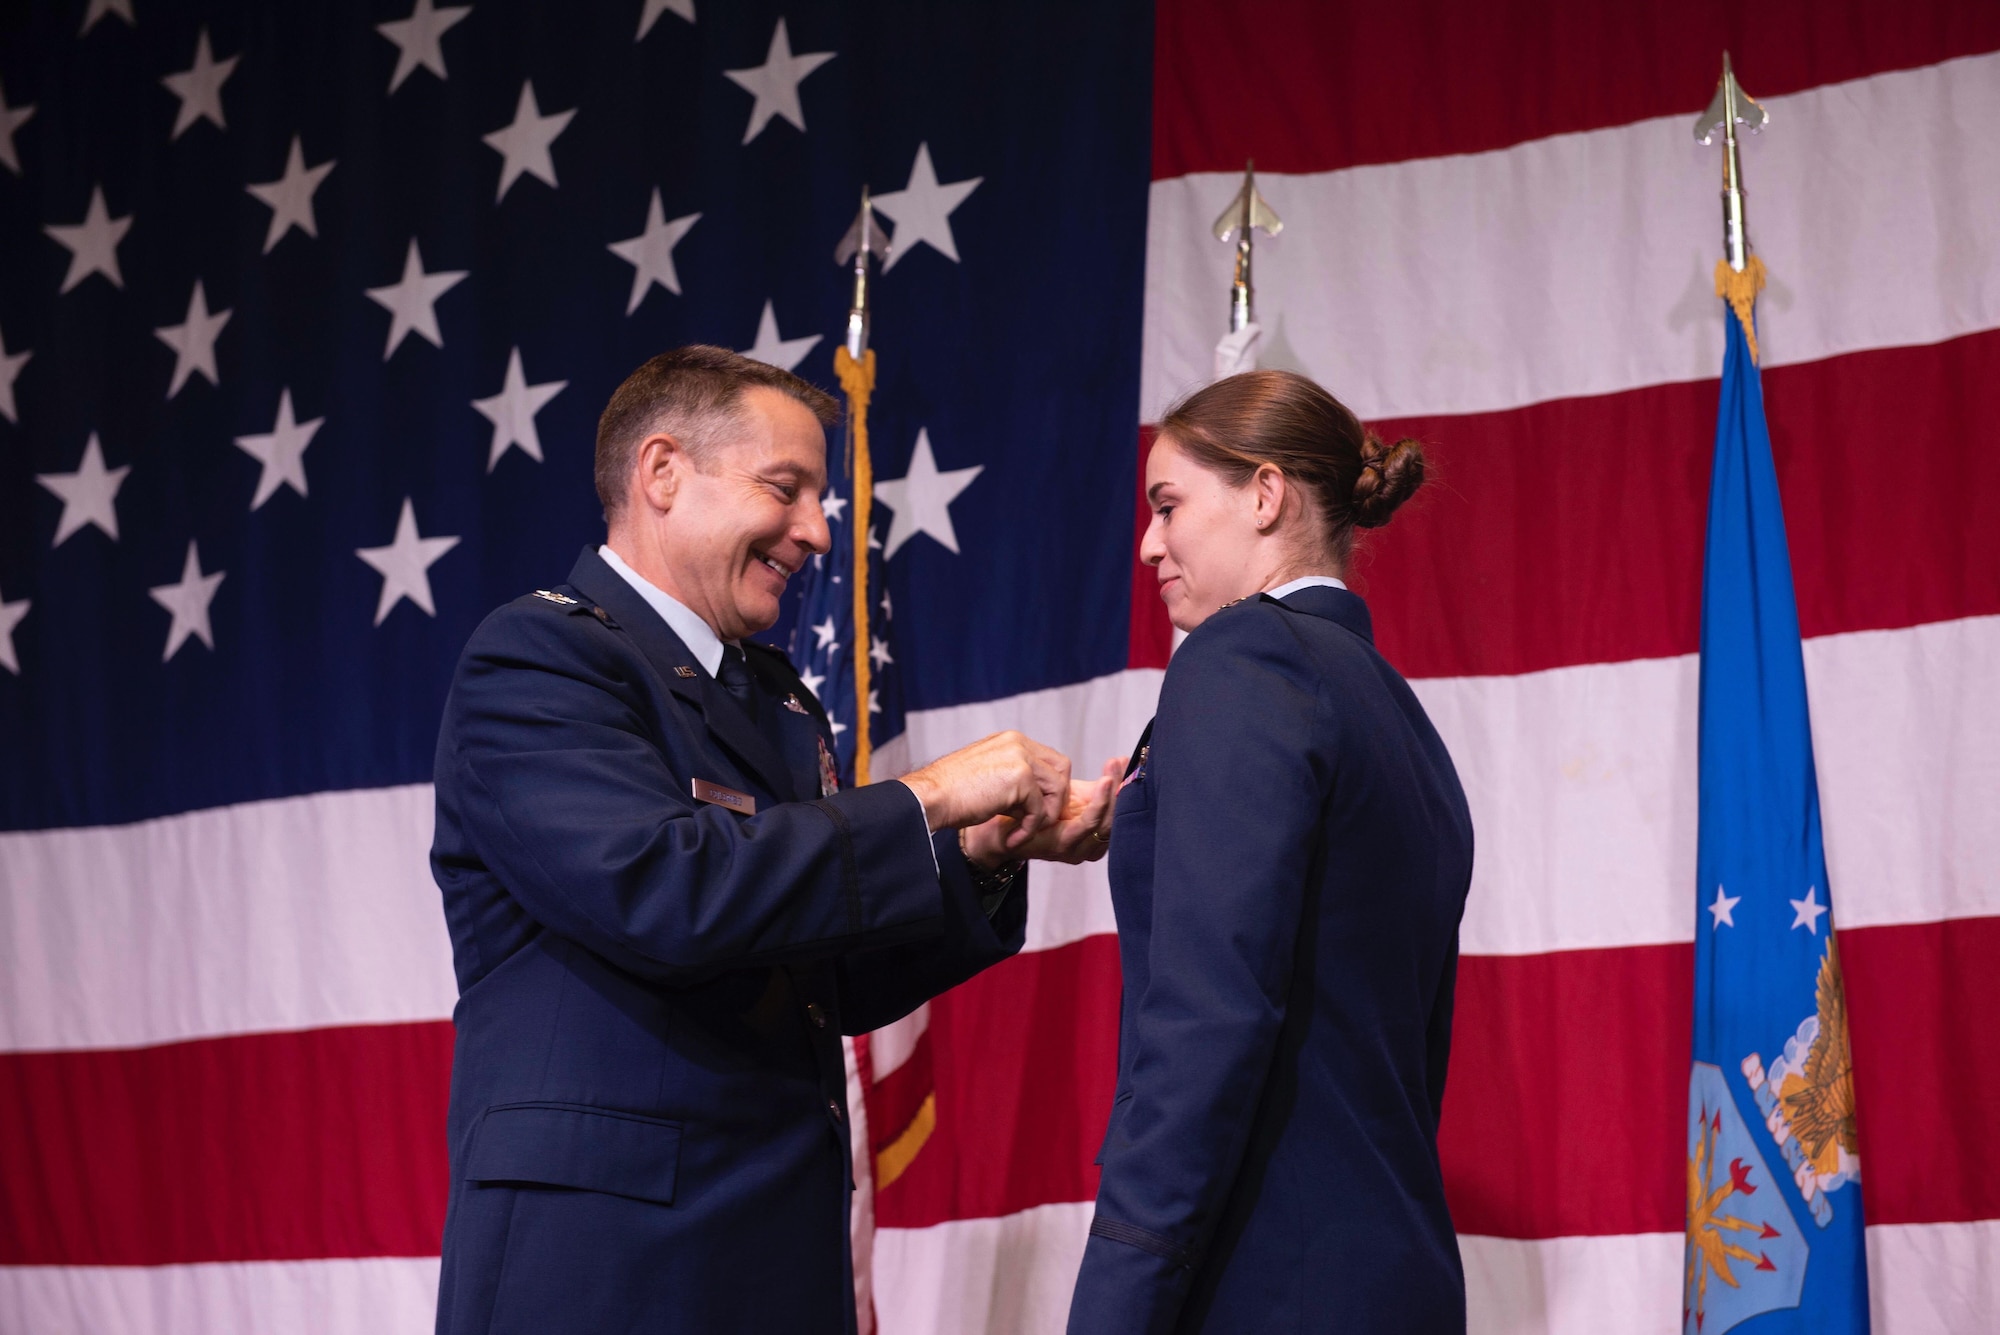 A pilot receives her aviation wings.